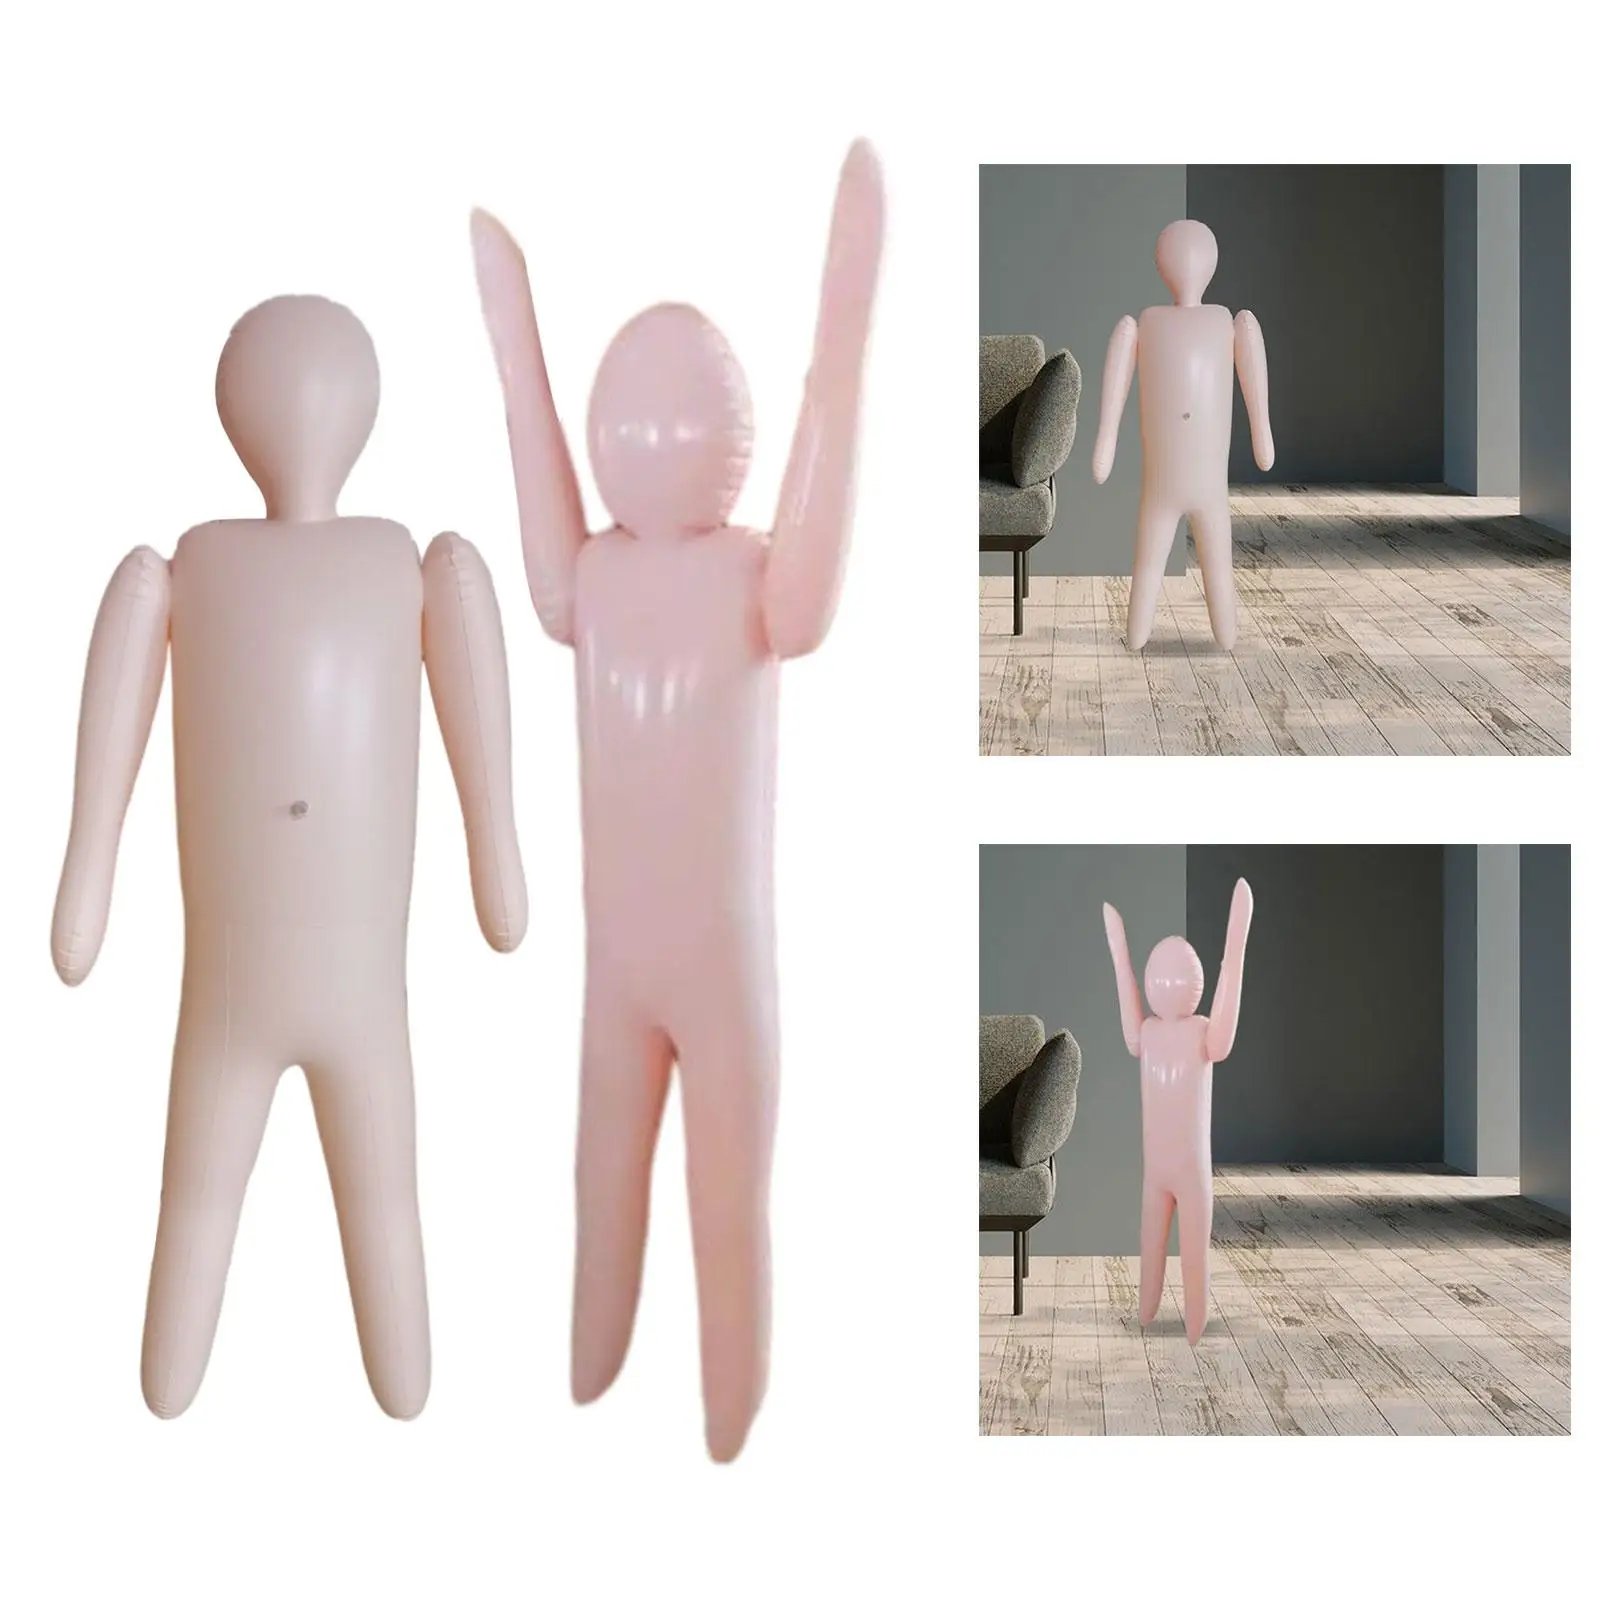 Inflatable Full Body PVC Display Model Full Size Dead Body Prop Inflatable Body Mannequin for Patio Corridors Outdoor Yard Doors